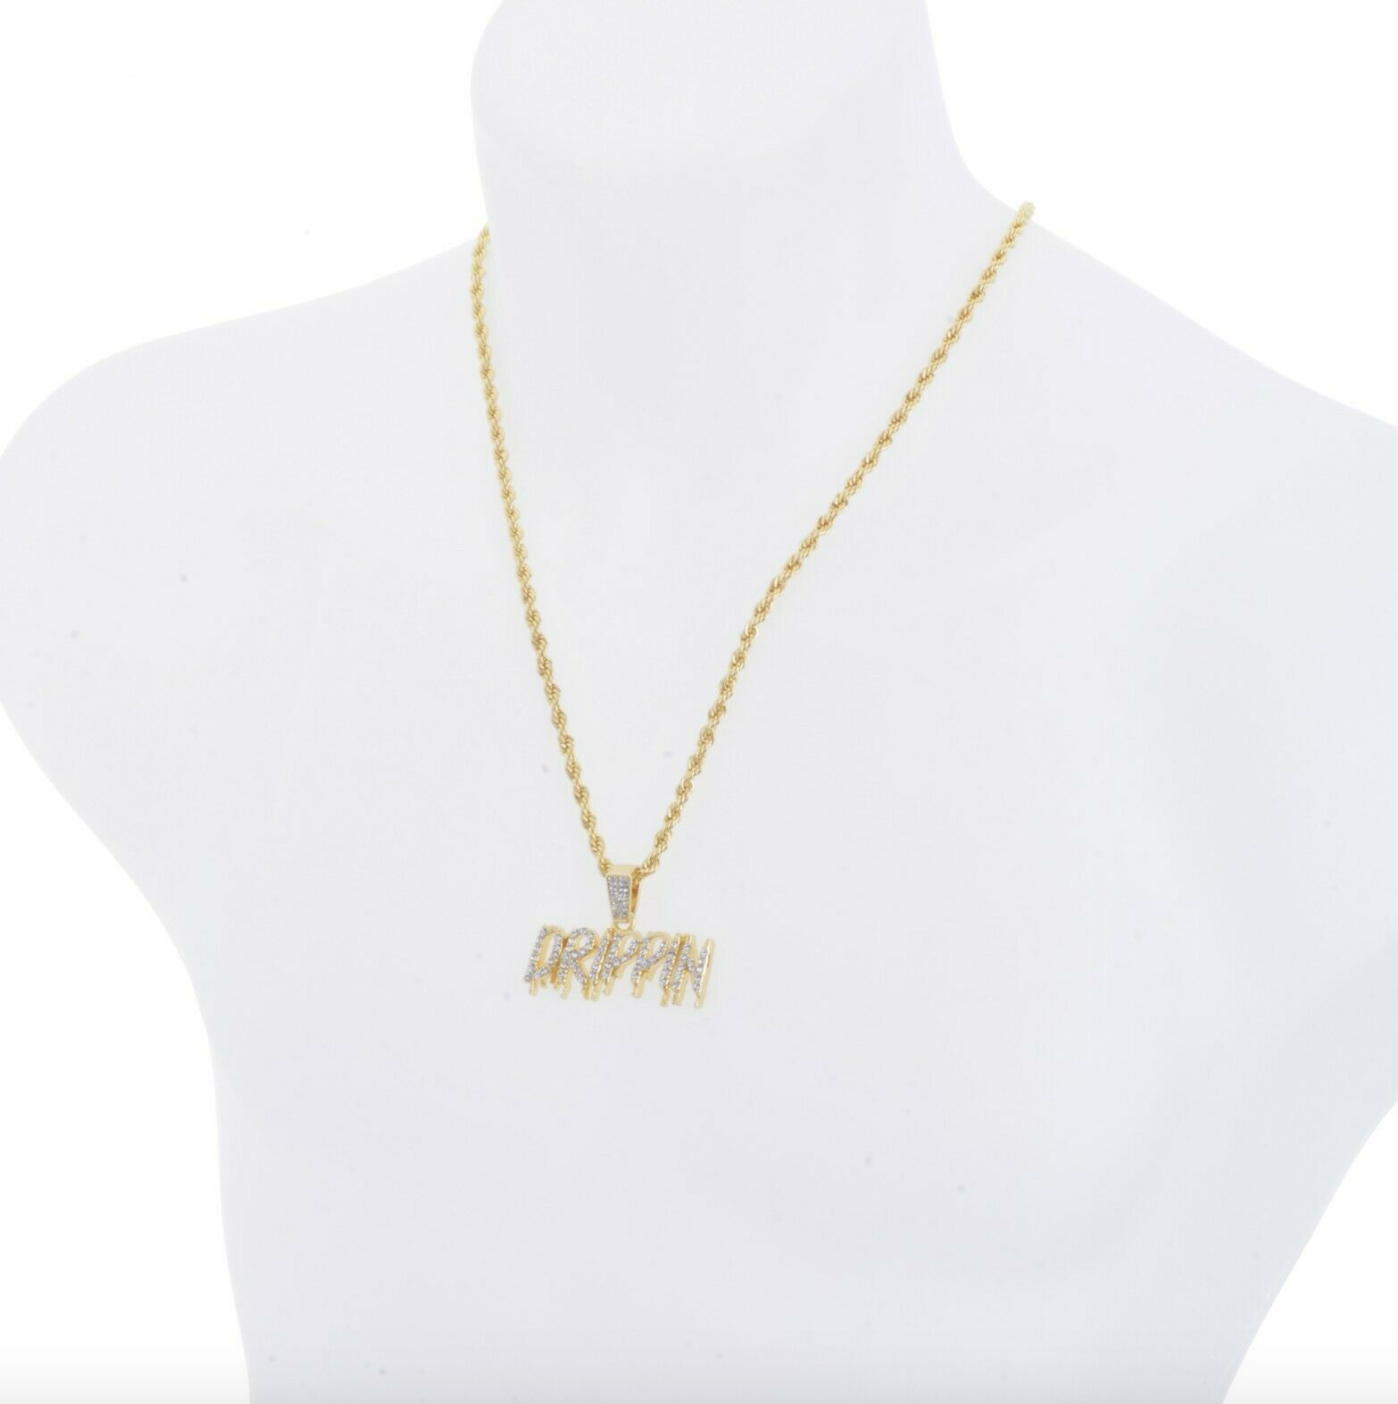 Iced Drippin Pendant Drip Necklace Gold Color Metal Alloy Simulated Diamond Necklace Hip Hop Twist Rope Chain Iced Out 24in.